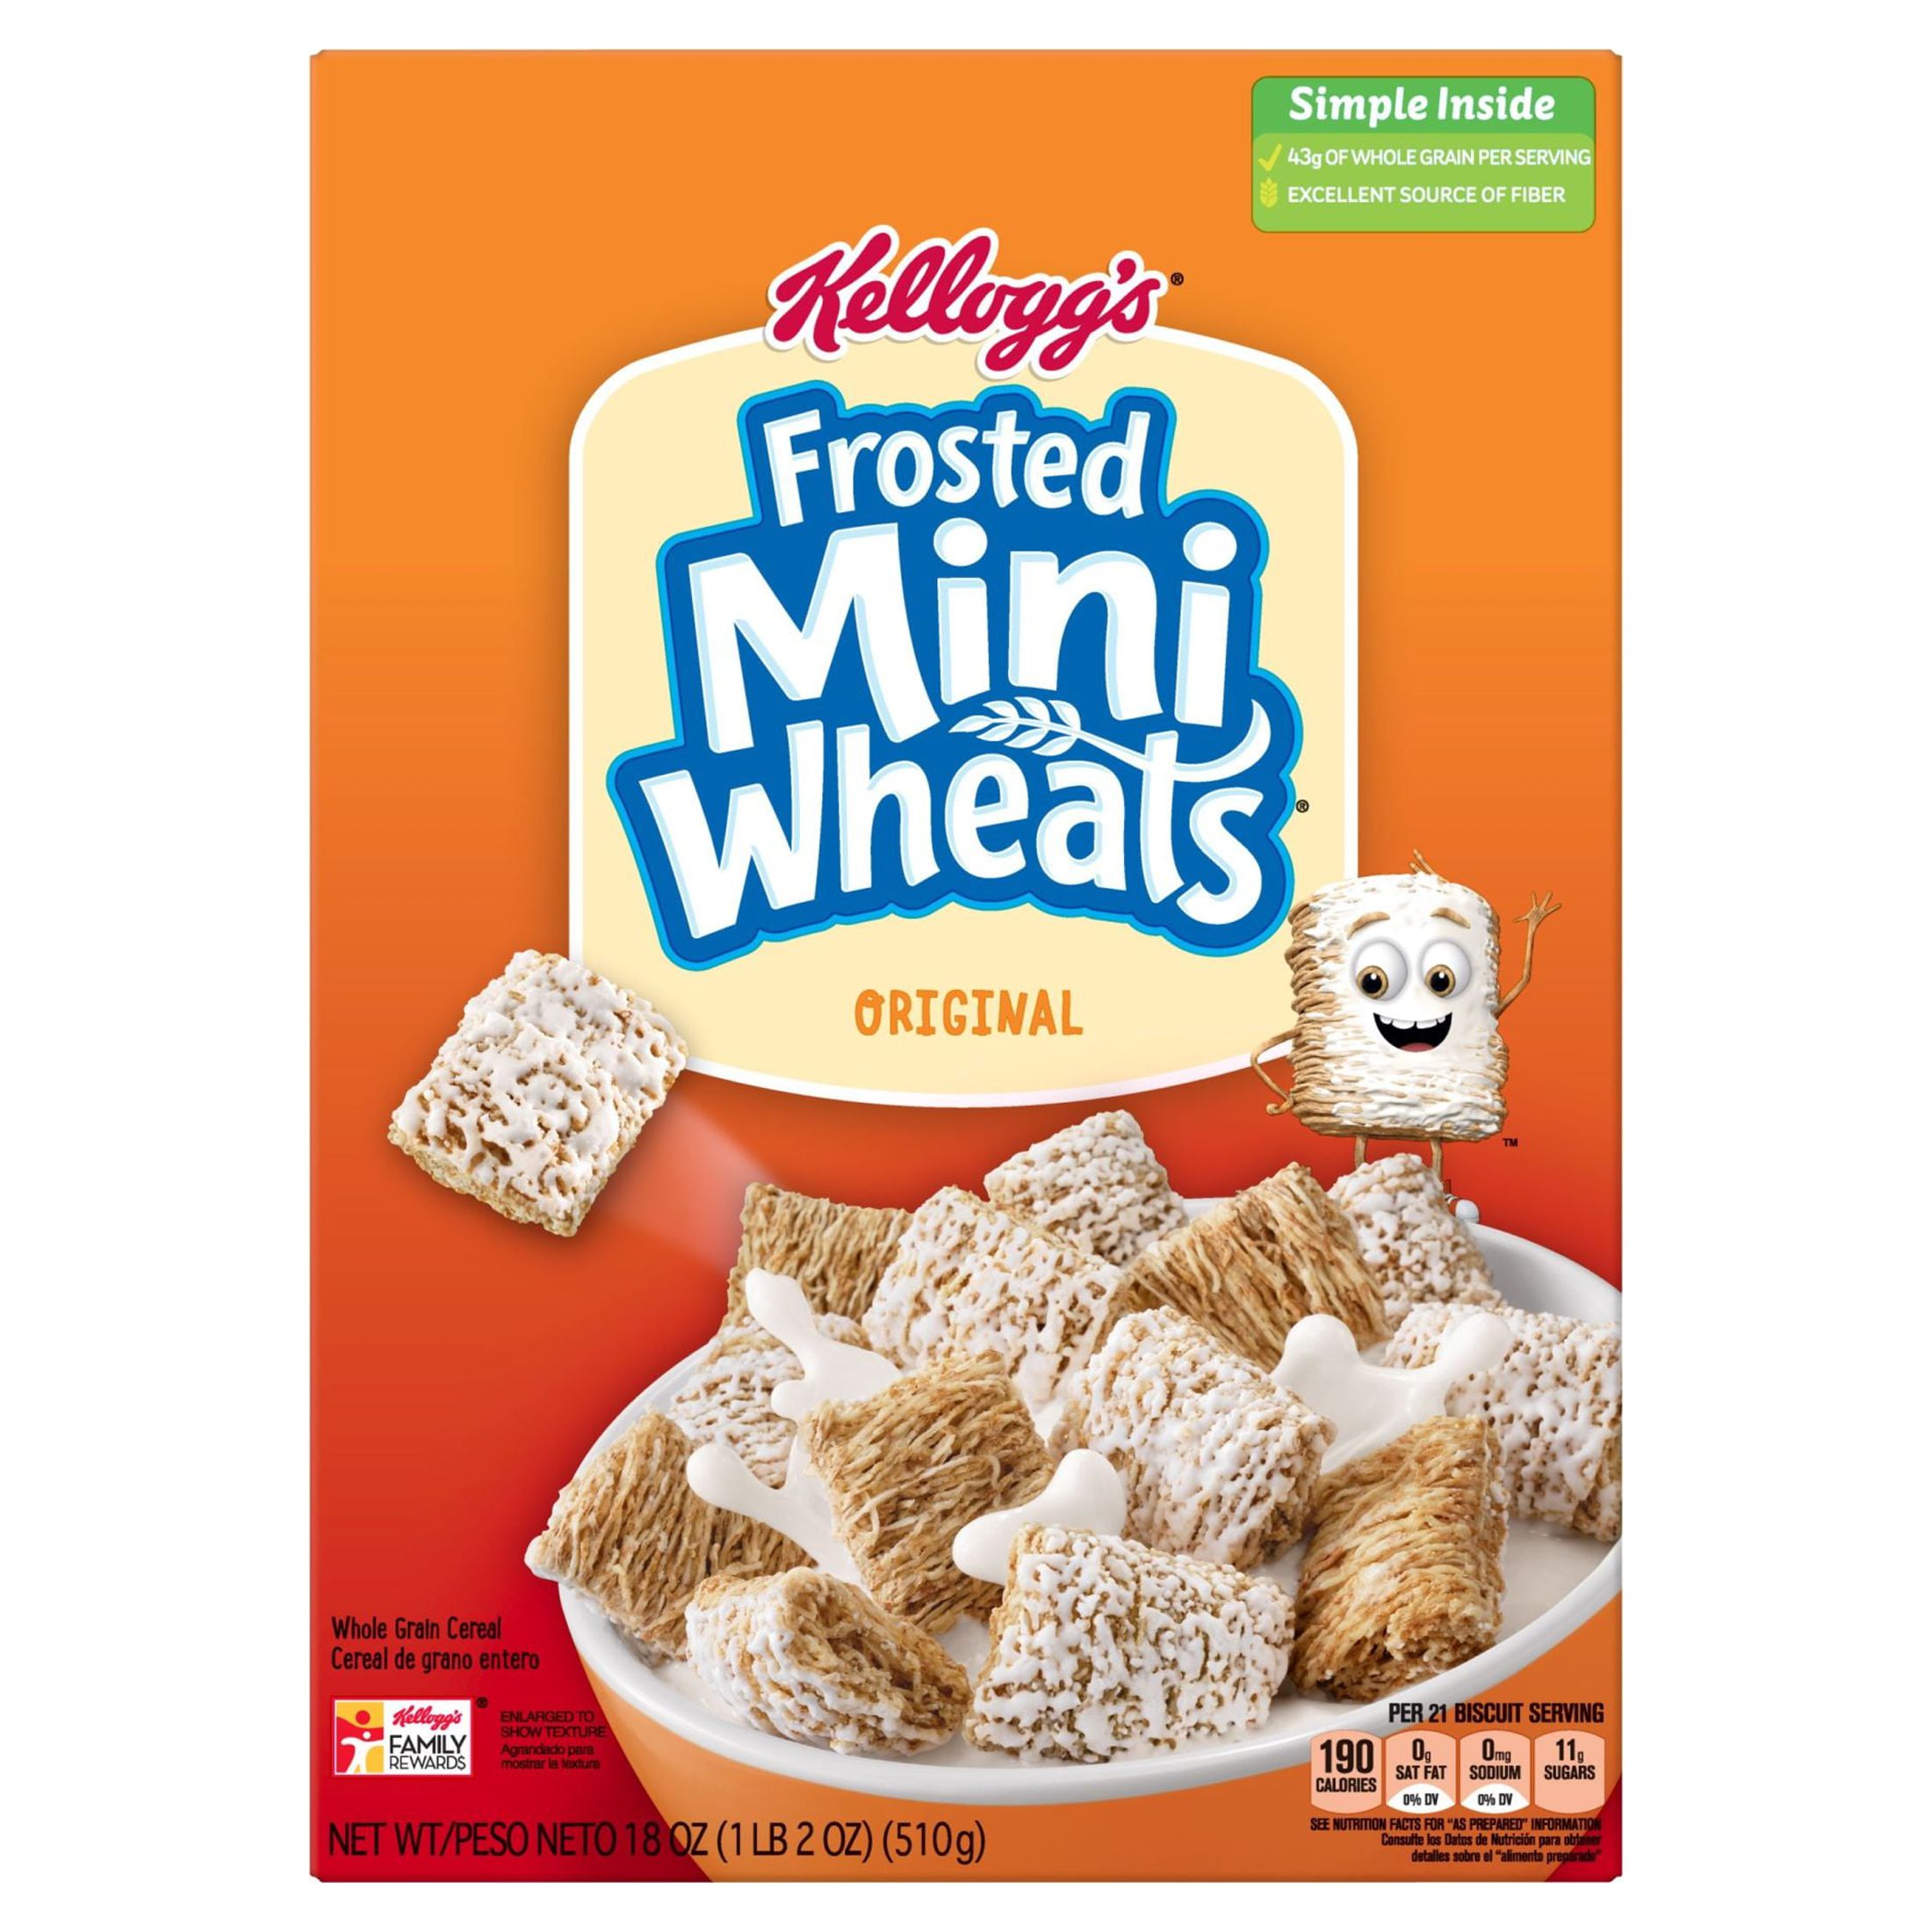 Kellogg's Frosted Mini-Wheats Original Cold Breakfast Cereal, 18 oz - image 1 of 11